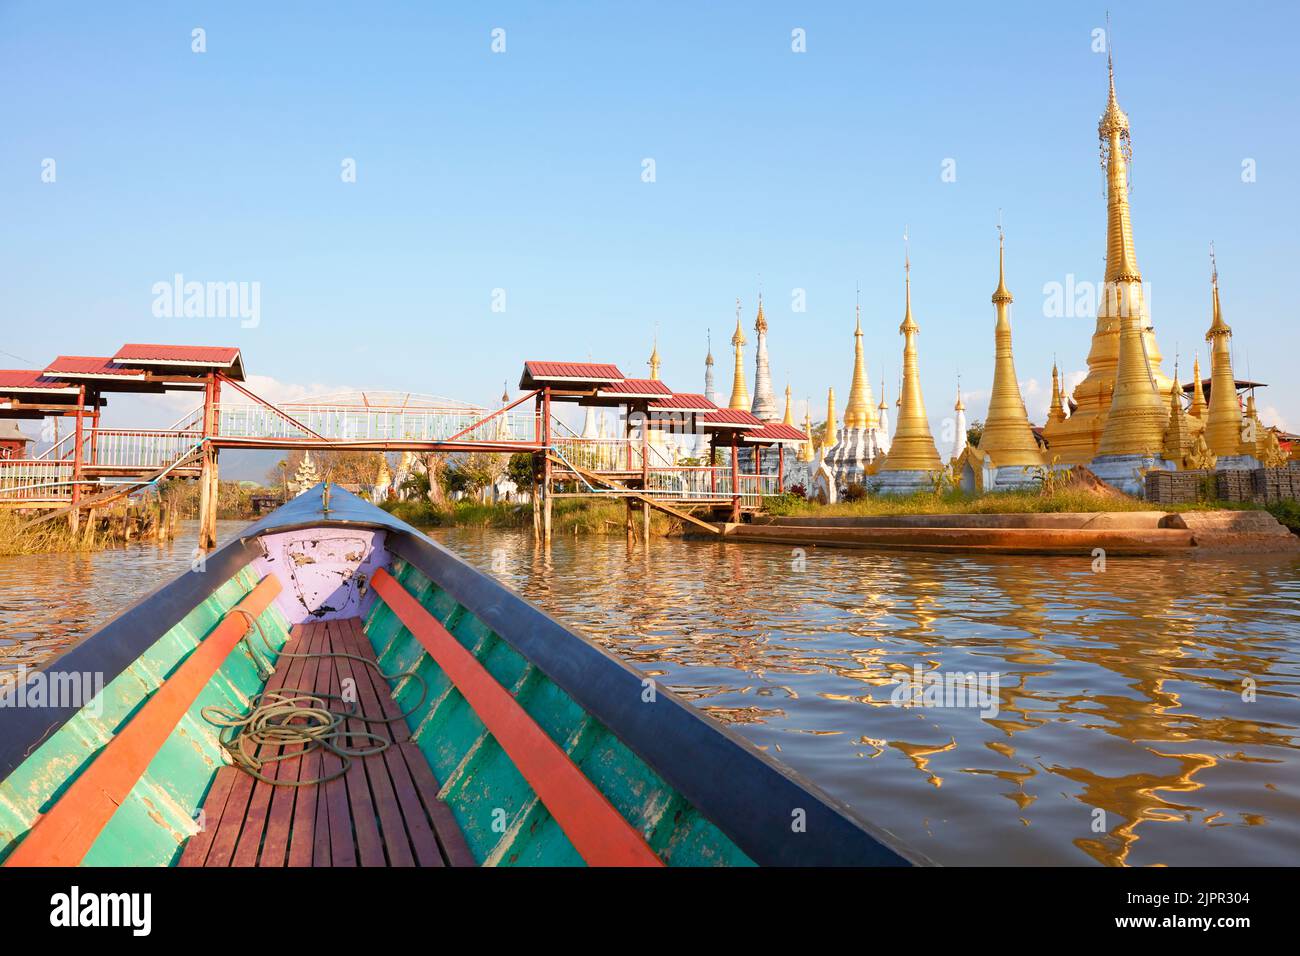 A wooden boat navigates on Inle Lak with golden Buddhist Pagodas in the background, Myanmar. Stock Photo